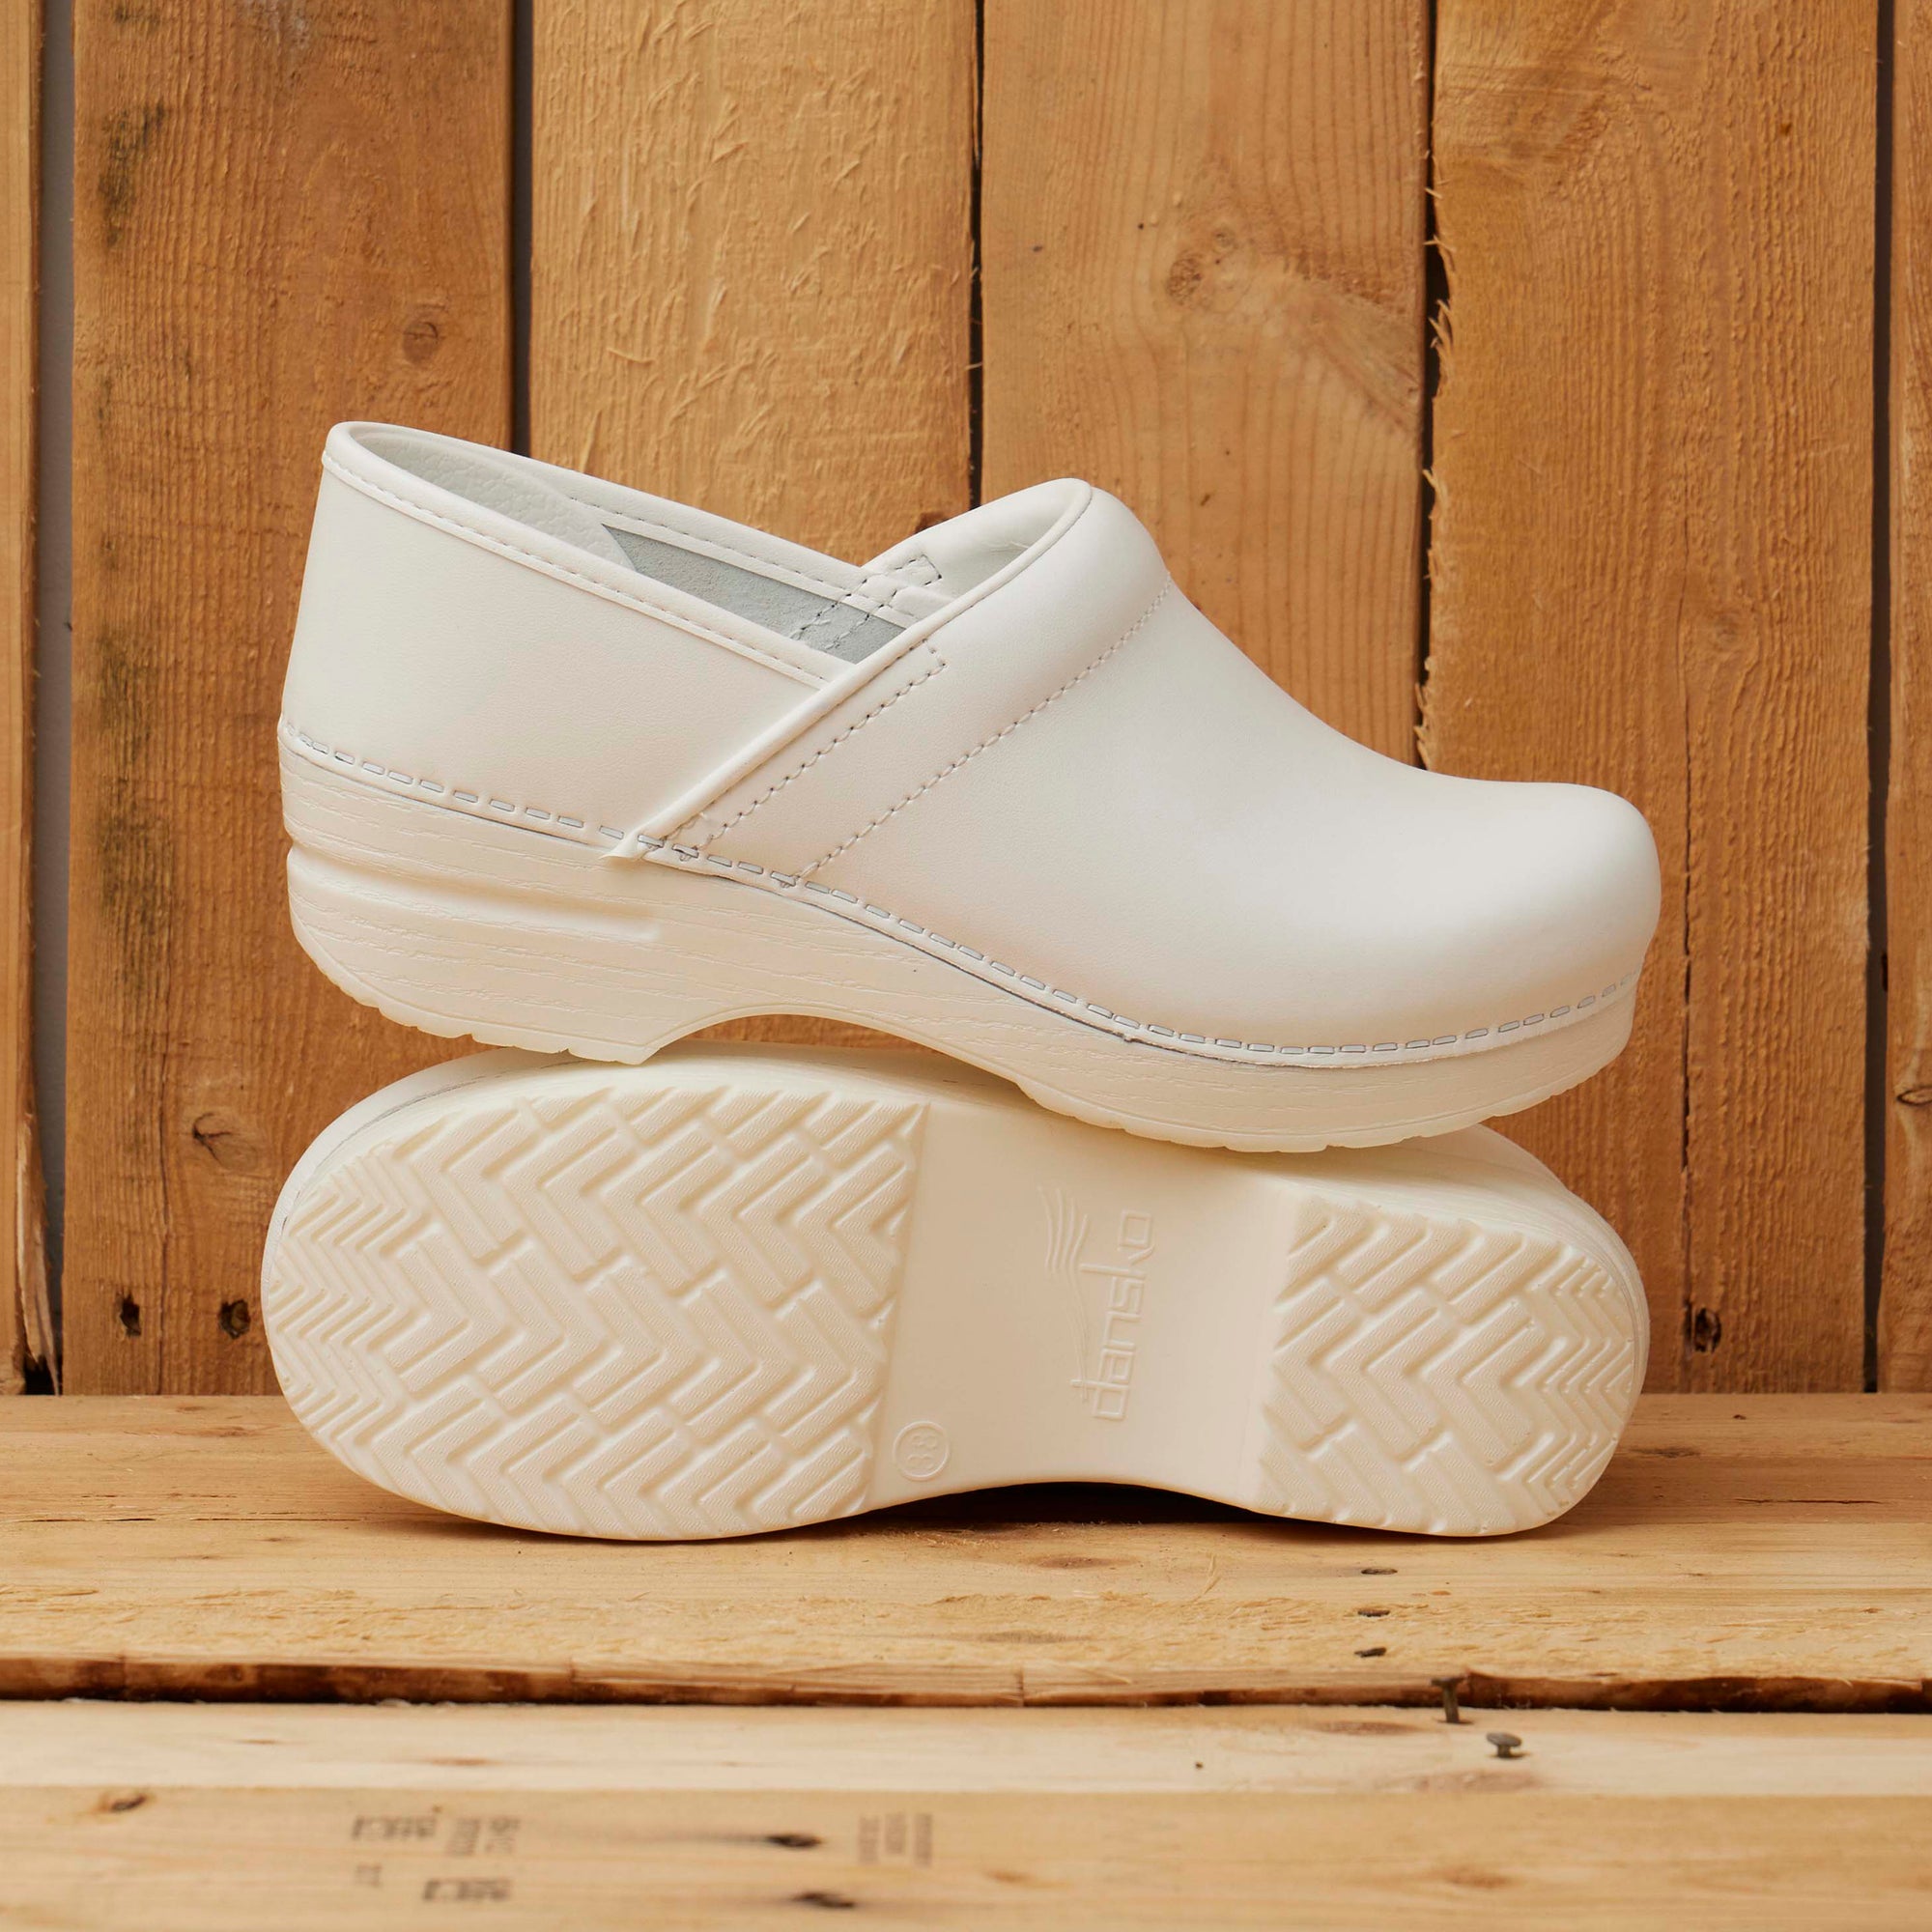 White Professional clogs on wooden backkground.